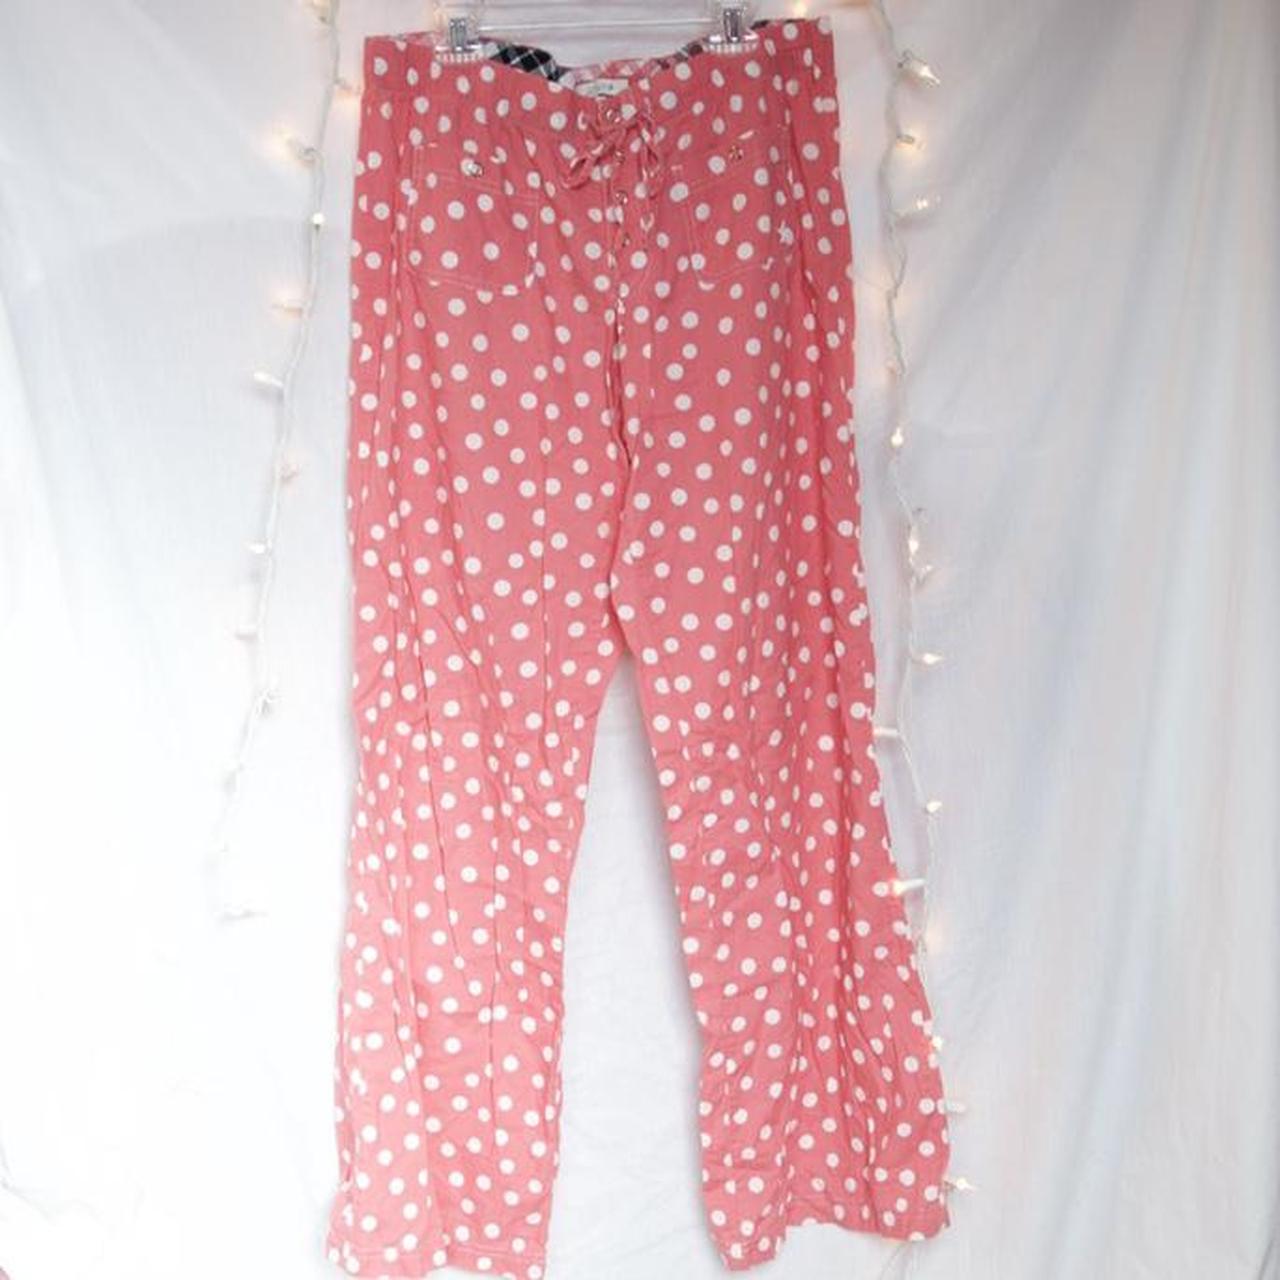 Really cute aerie pajama pants in pink with white... - Depop